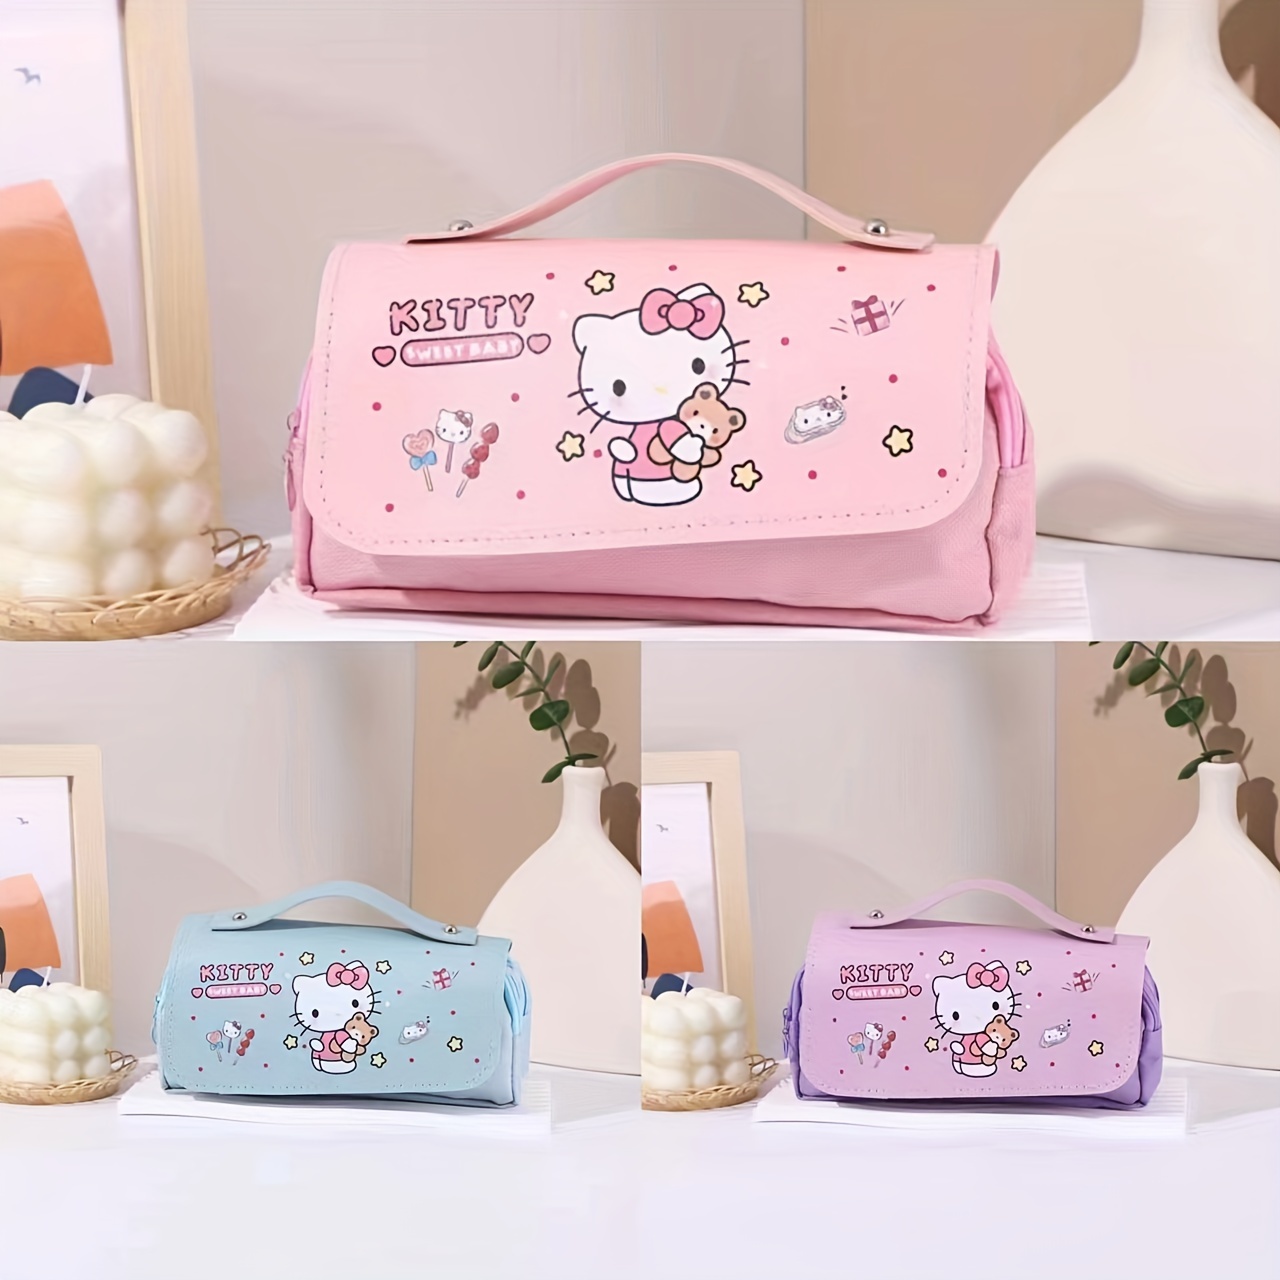 Sanrio, Office, 2 Pack Of Hello Kitty Pencils